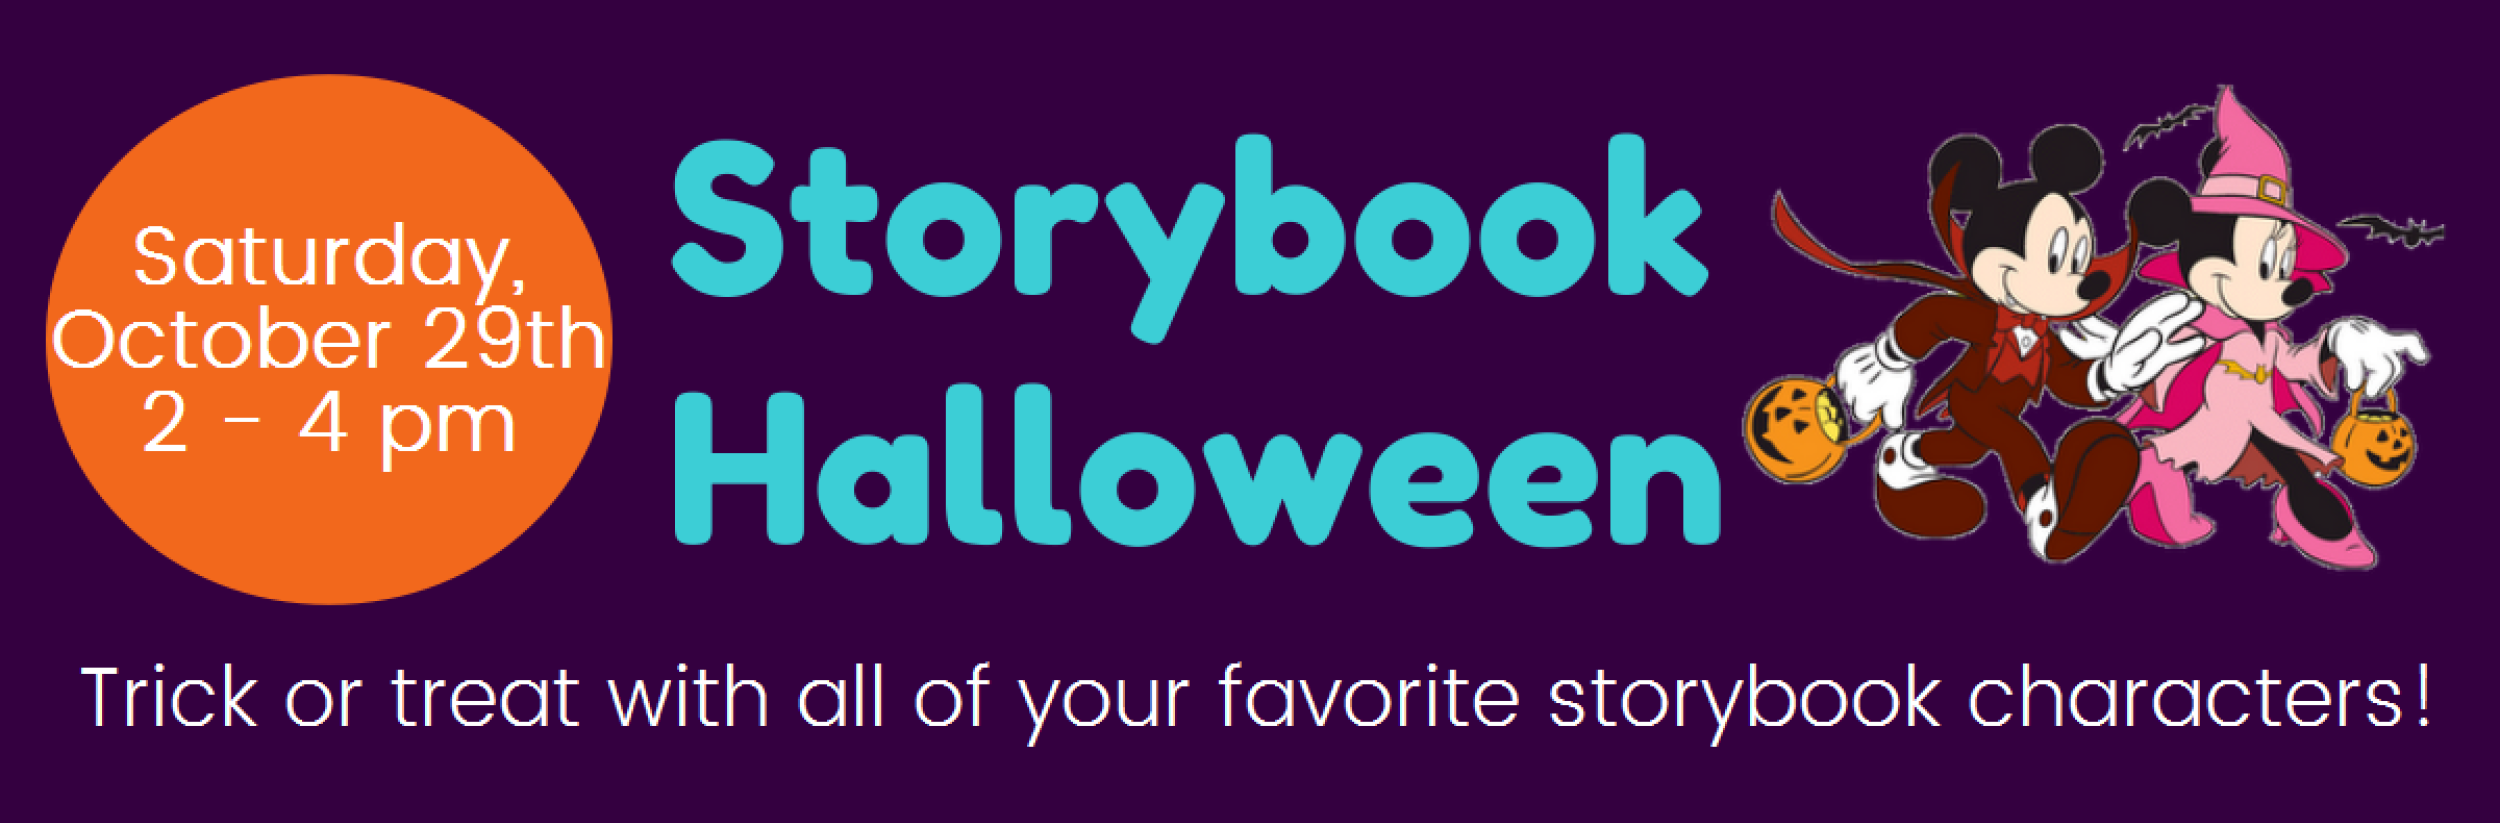 Image for "Storybook Halloween 2022"